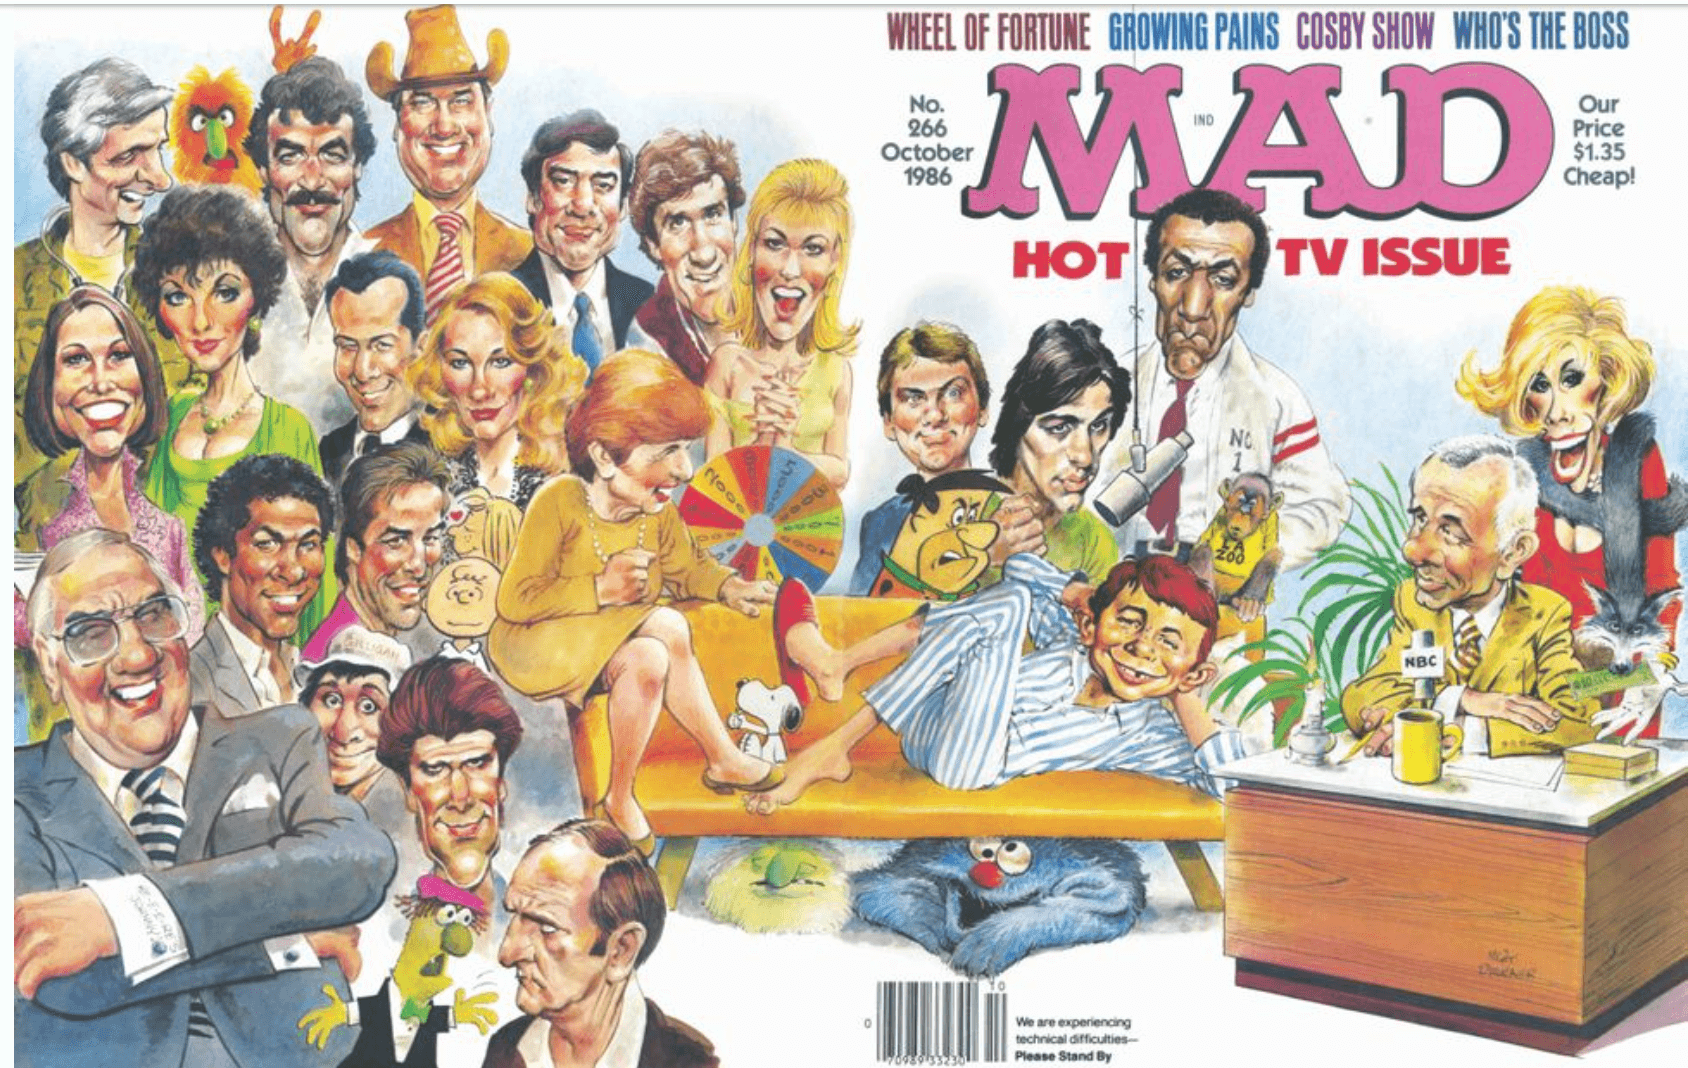 A 1986 Mad magazine cover designed by Mort Drucker.